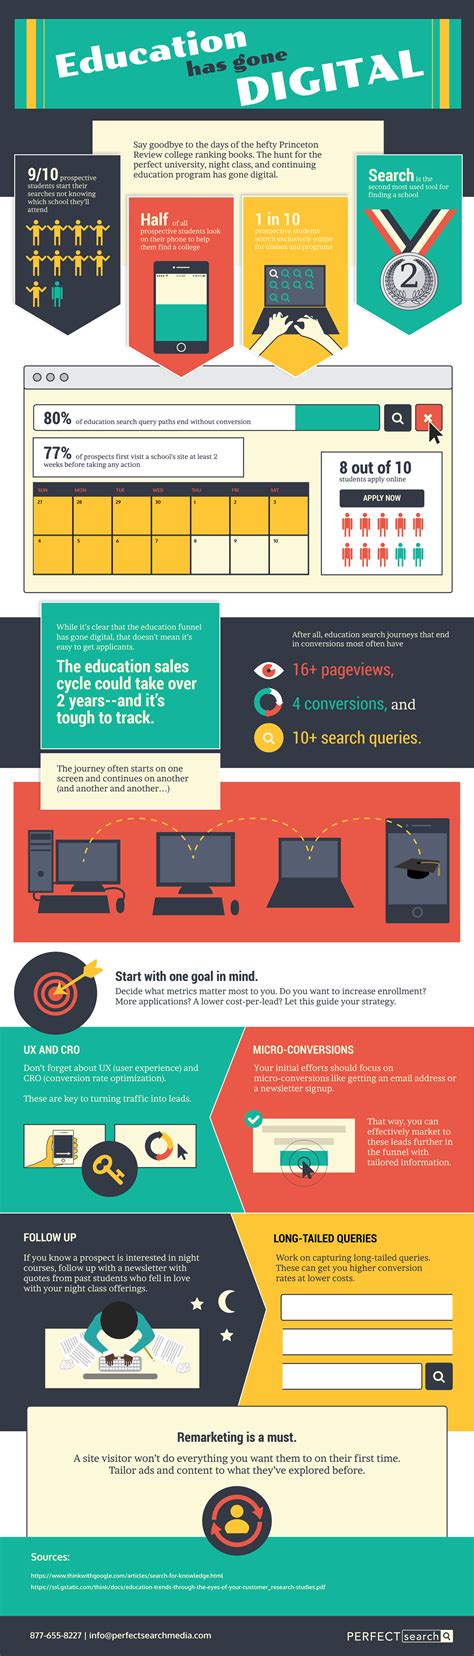 Why You Need to Ace Digital Marketing for Higher Education [Infographic]